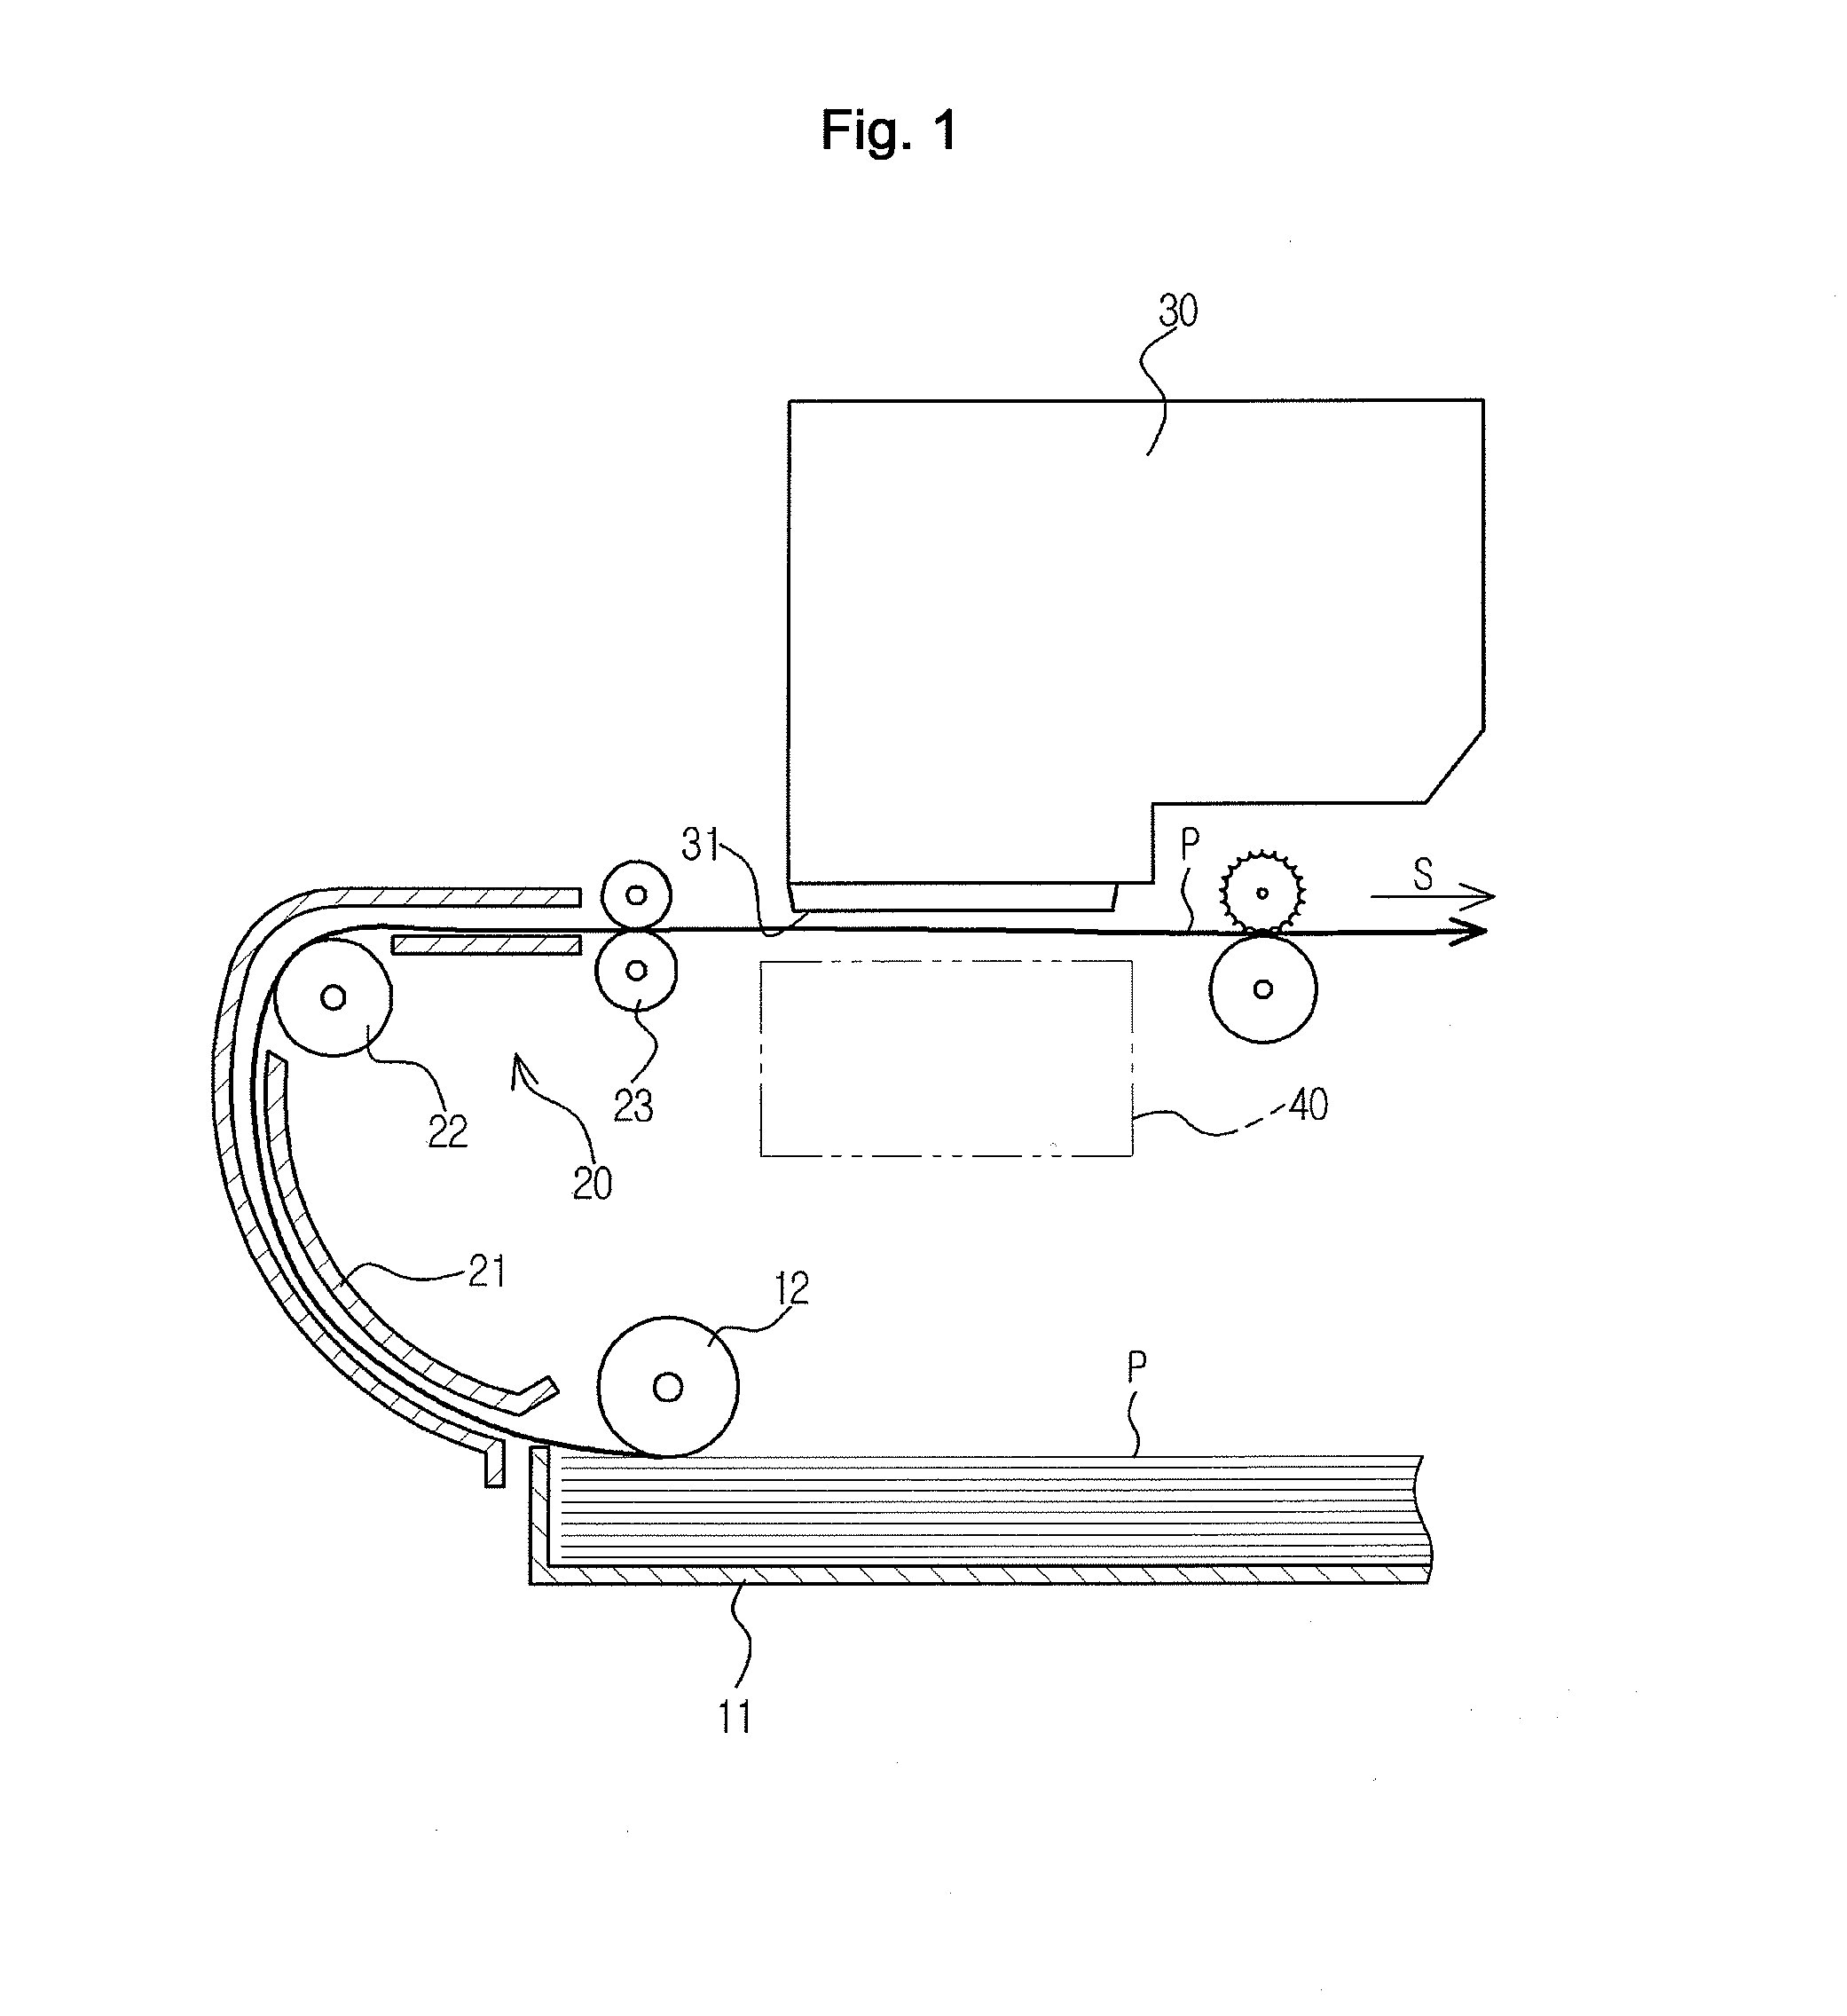 Ink-jet image forming apparatus